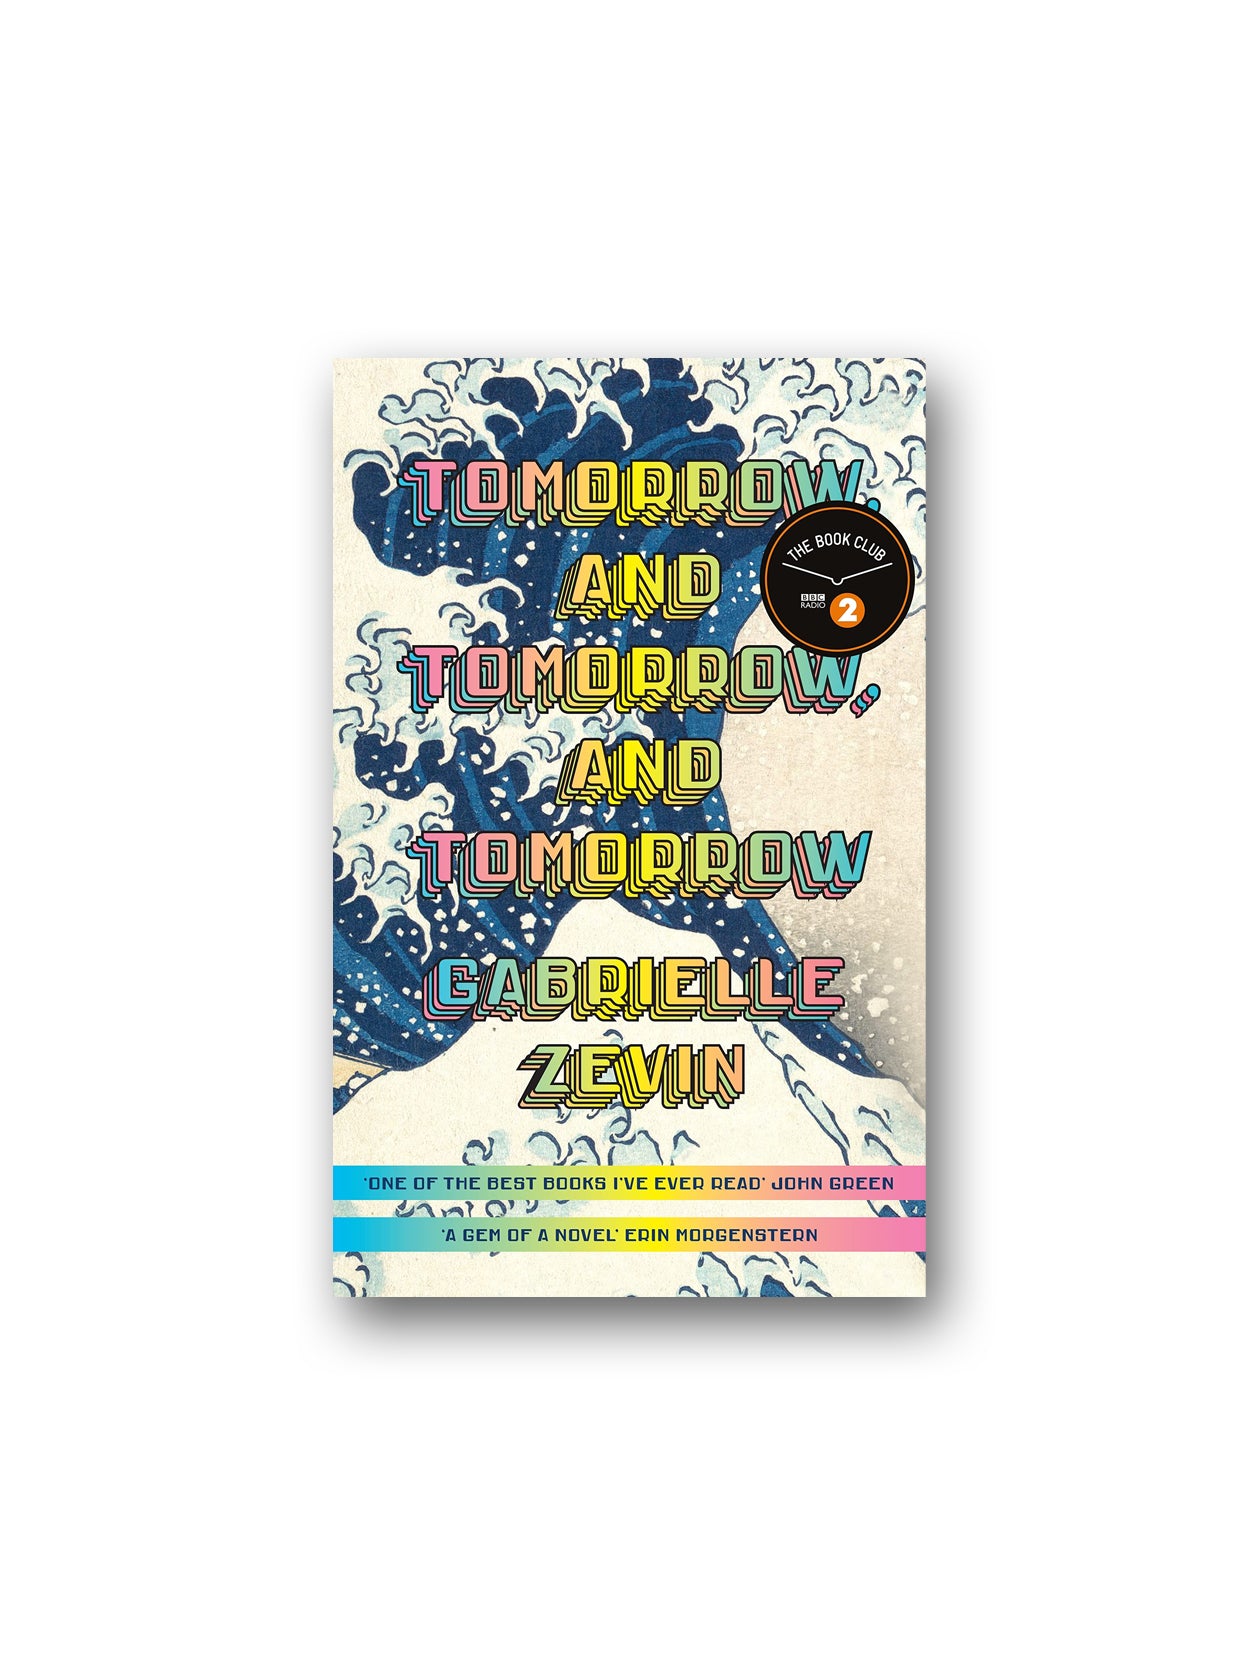 Gabrielle Zevin on her novel 'Tomorrow and Tomorrow and Tomorrow